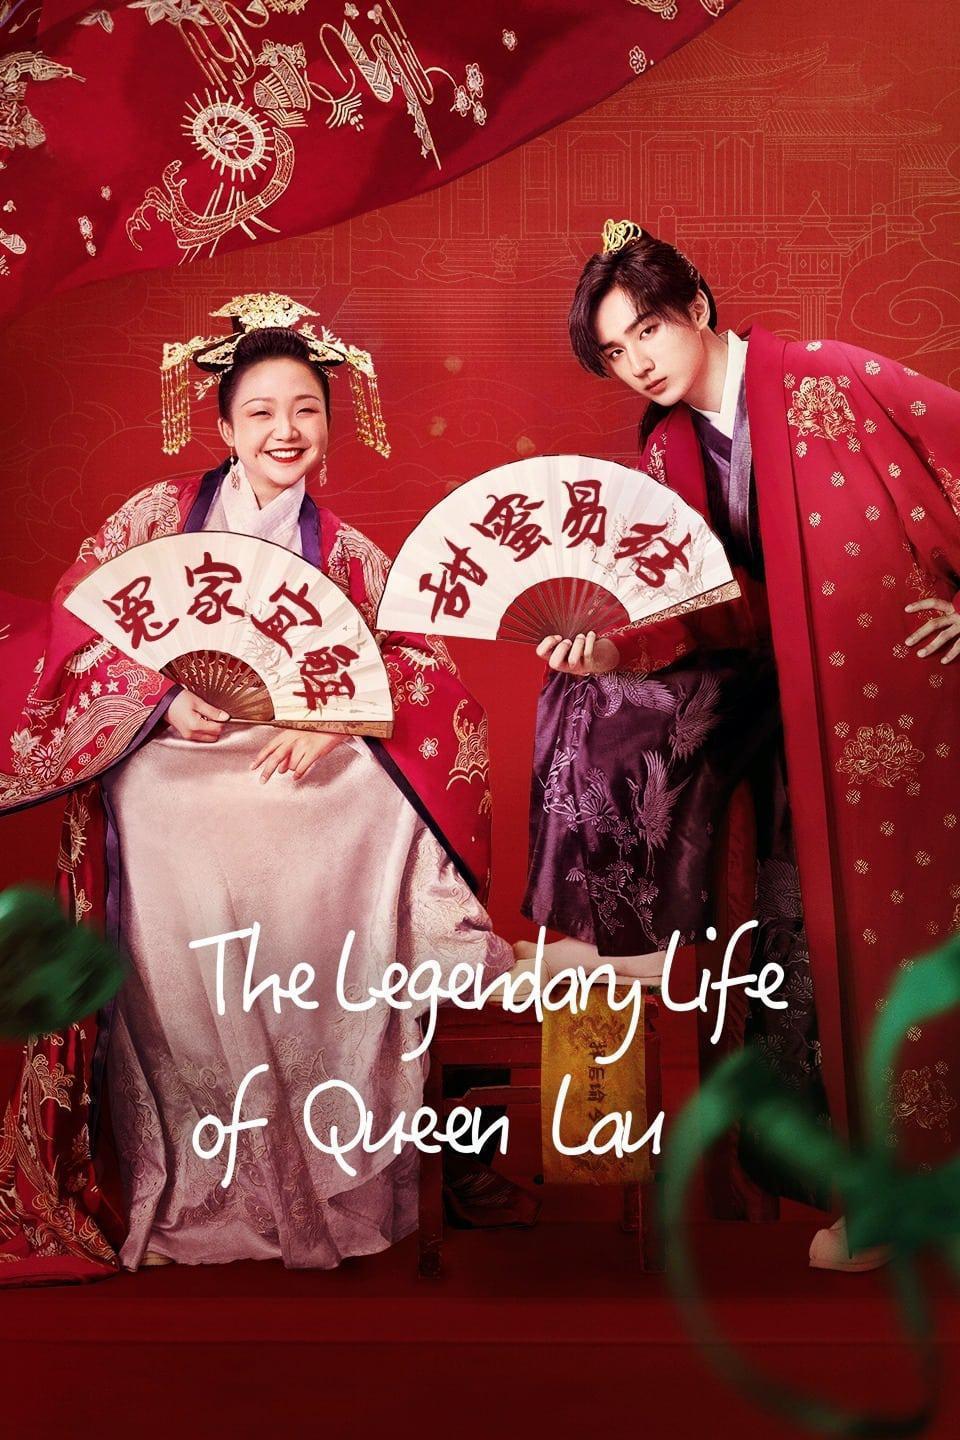 TV ratings for The Legendary Life Of Queen Lau (我叫刘金凤) in New Zealand. Youku TV series